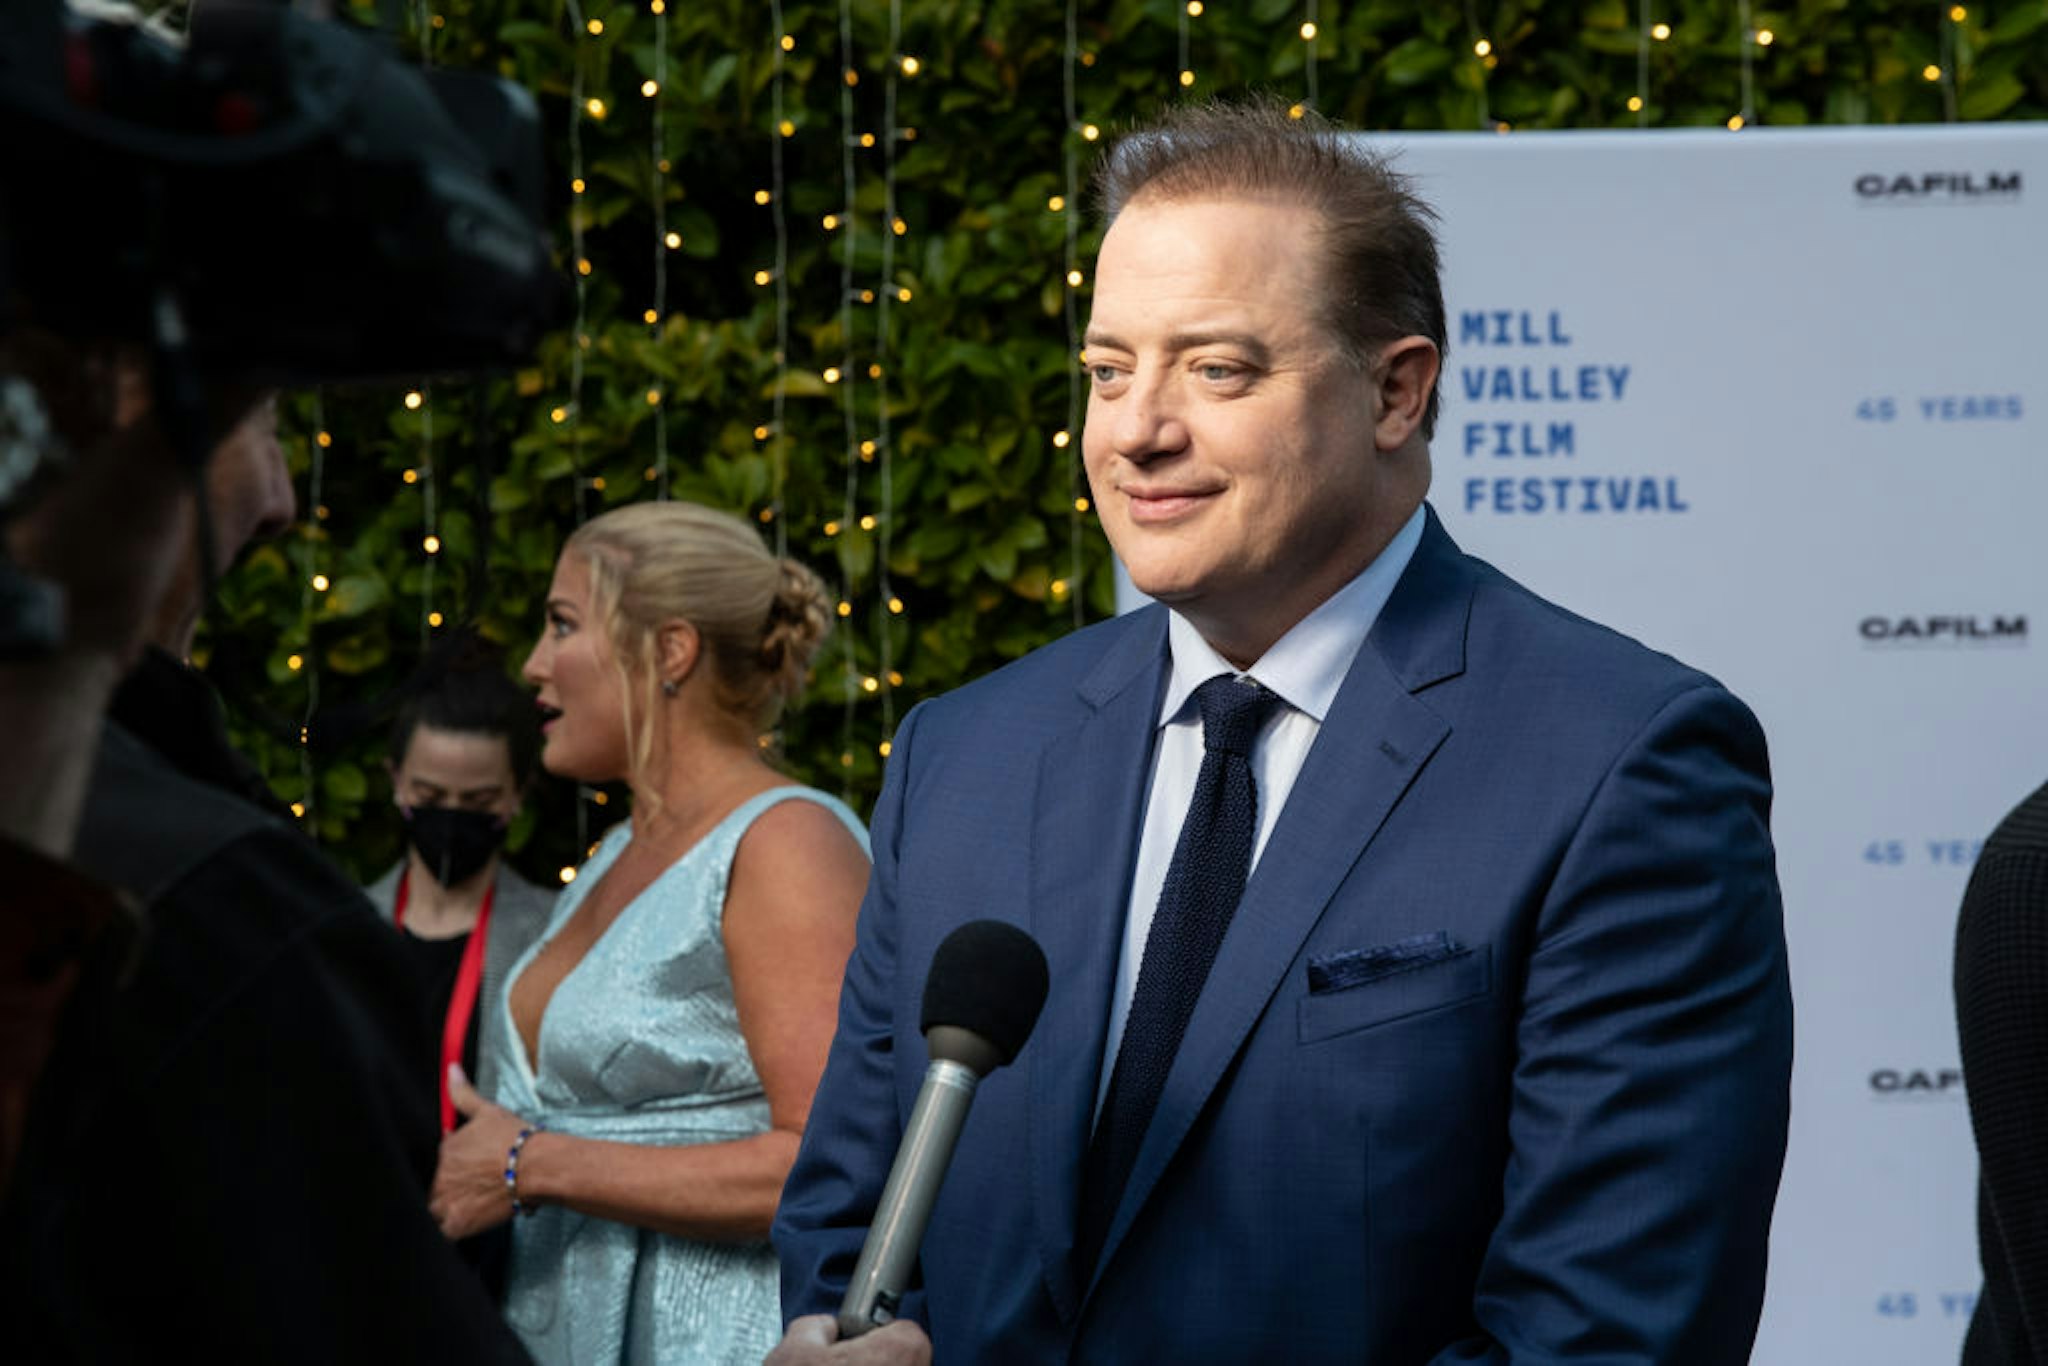 MILL VALLEY, CALIFORNIA - OCTOBER 13: Actor Brendan Fraser gives an interview at the premiere of "The Whale" at 45th Mill Valley Film Festival at The Outdoor Art Club on October 13, 2022 in Mill Valley, California. (Photo by Miikka Skaffari/Getty Images)